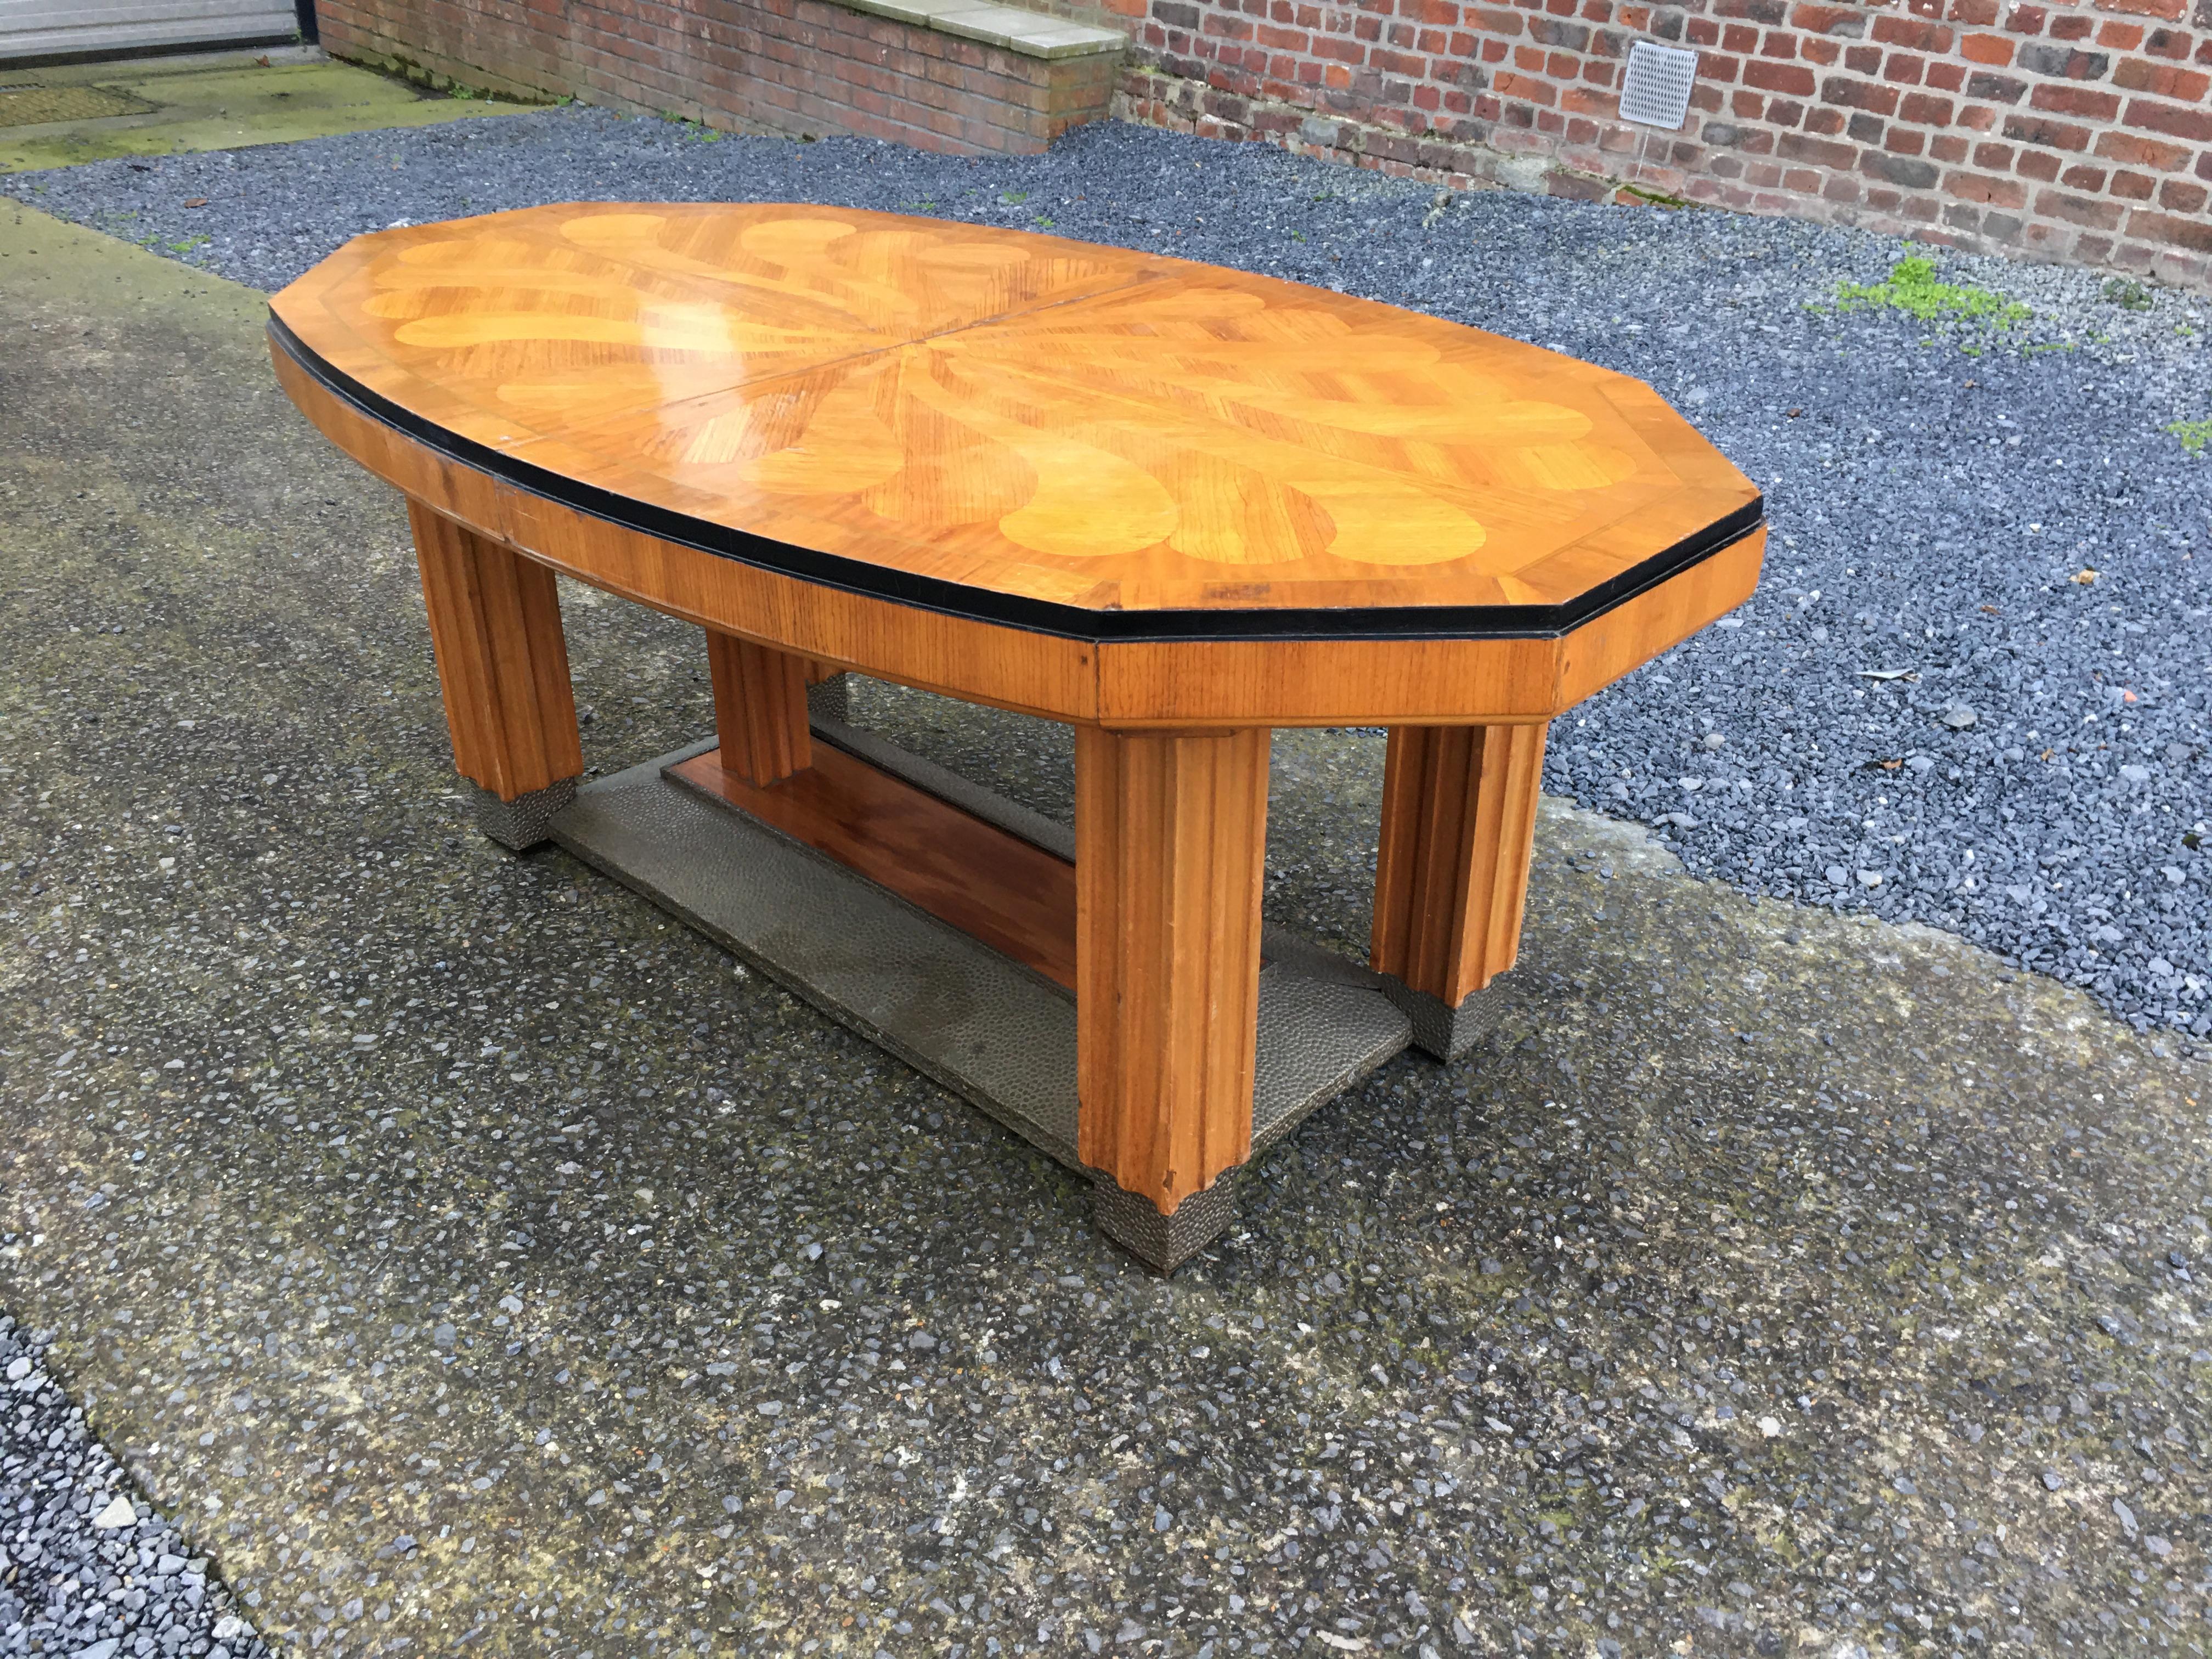 Large Art Deco Dining Table with Marquetry Design on the Top, circa 1925-1930 For Sale 3